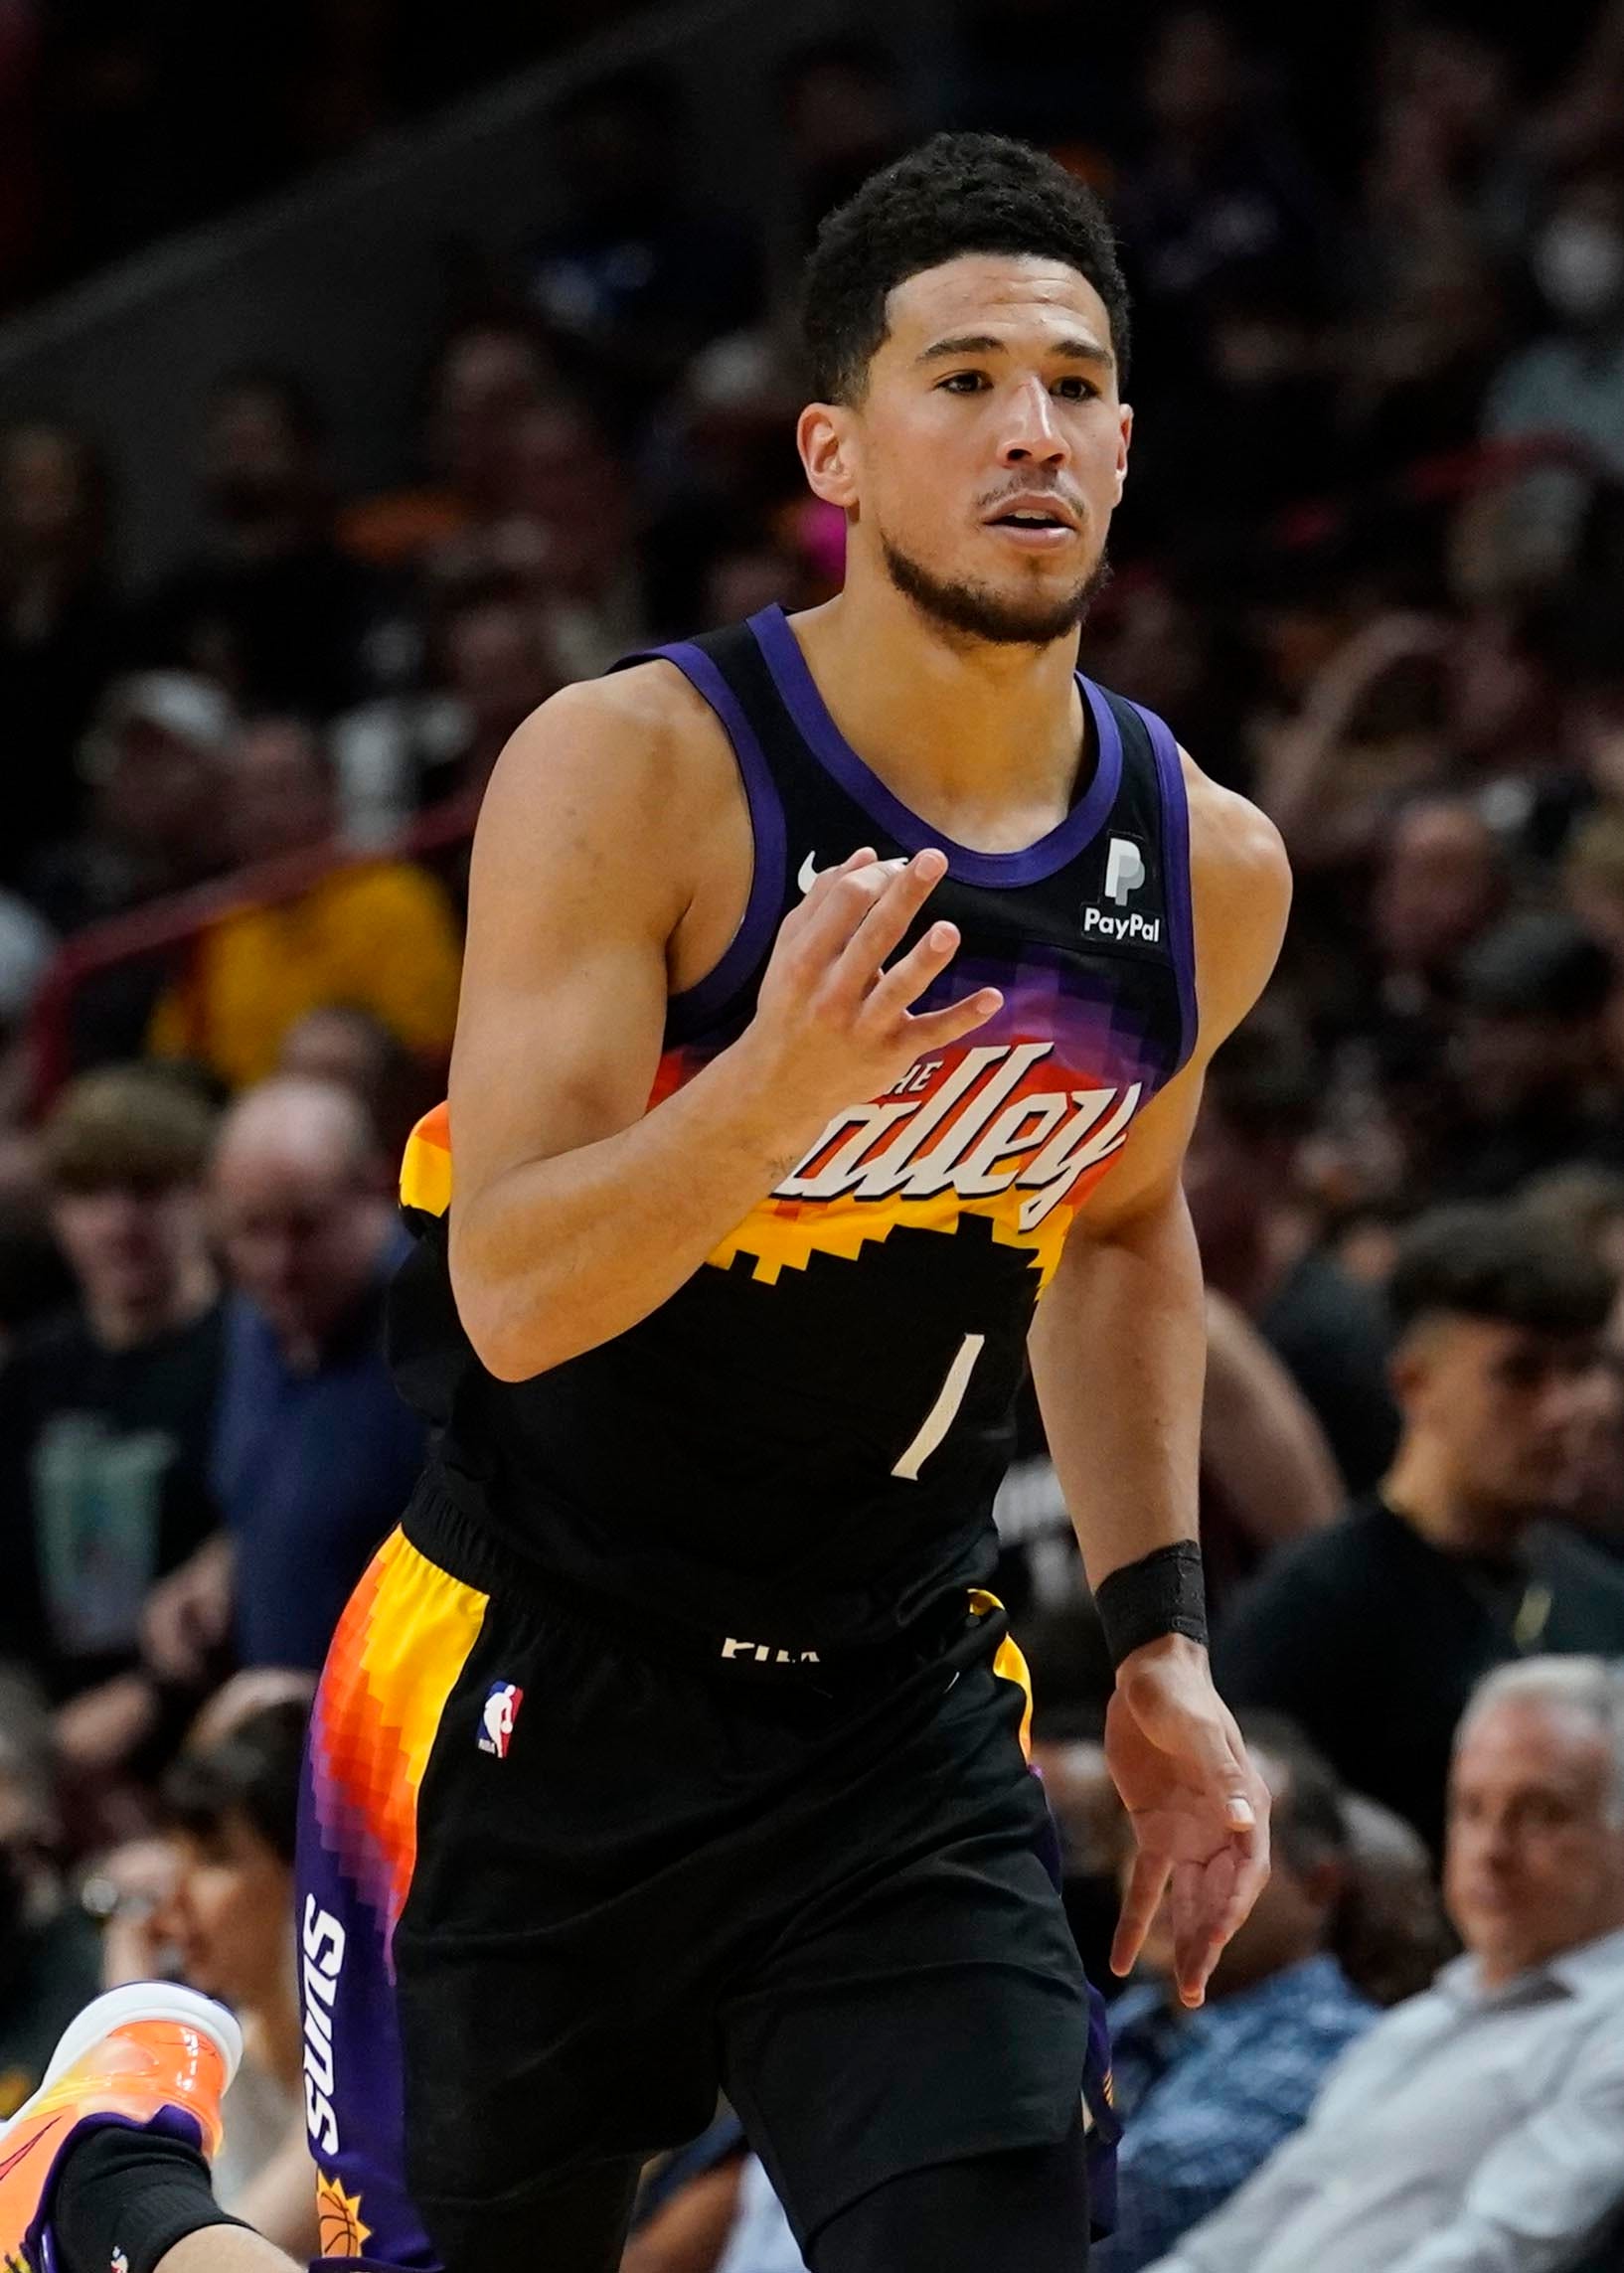 Devin Booker set to return after missing four games in COVID protocols